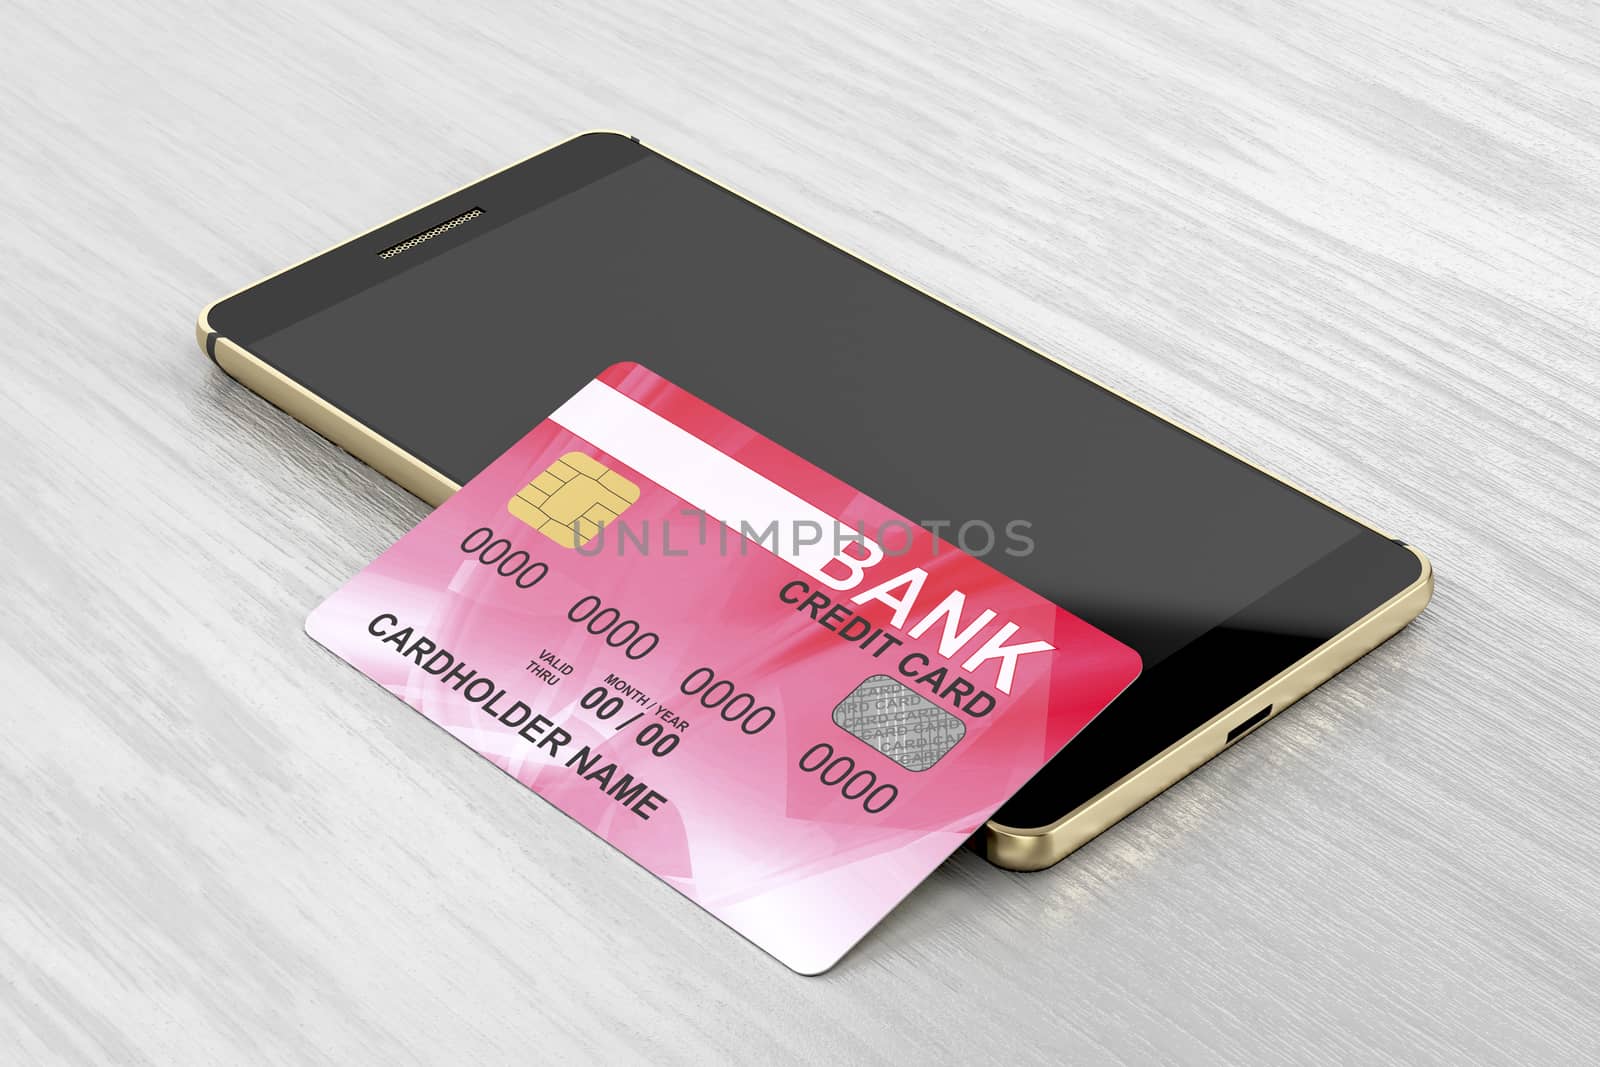 Smartphone and credit card on the table 